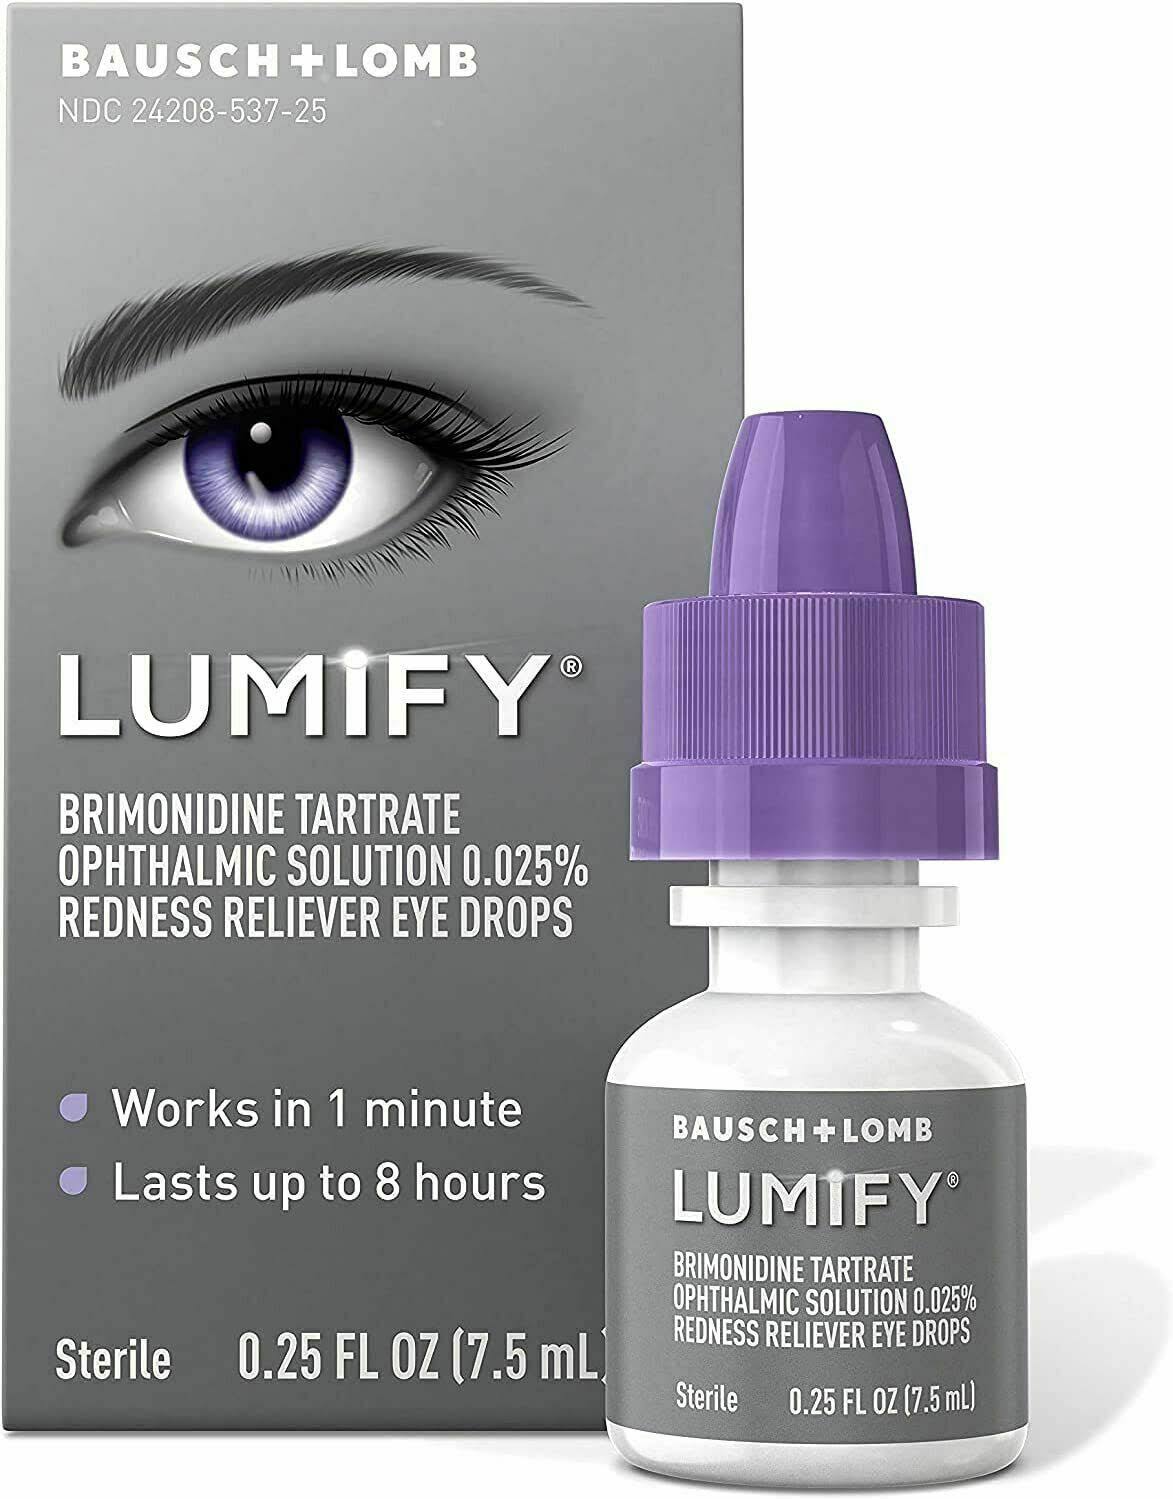 Bausch + Lomb Large Lumify Eye Drops 7.5ml 0.25fl.oz Redness Relief Exp. 03/2024